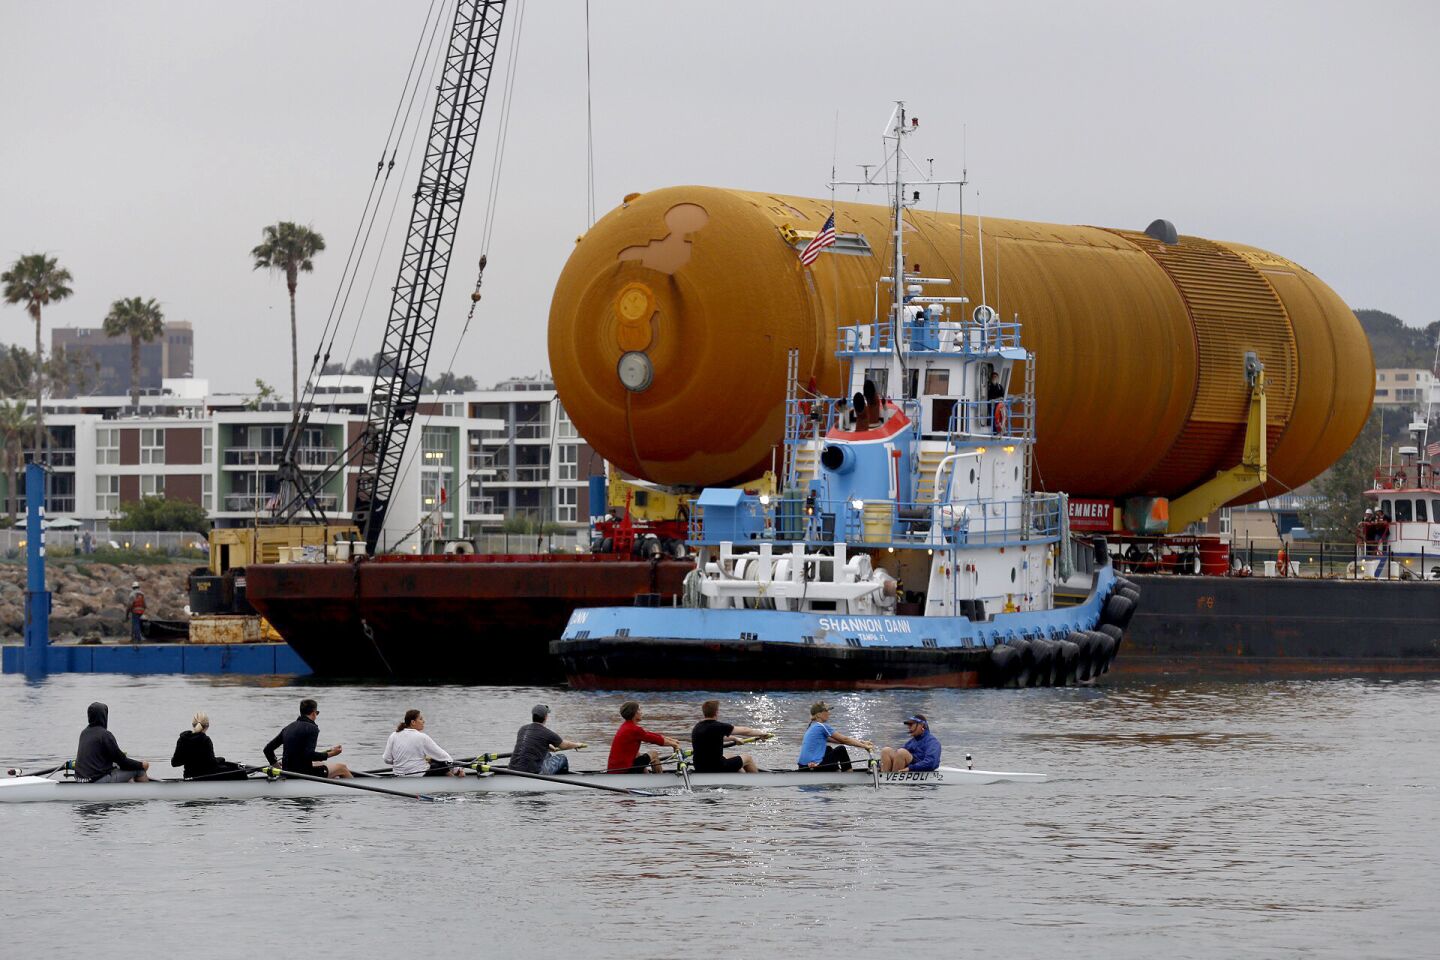 ET-94, NASA's last remaining space shuttle external tank, arrives in Marina del Rey prior to docking next to Fisherman's Village in advance of the final leg of its voyage through the streets of Los Angeles to the California Science Center.